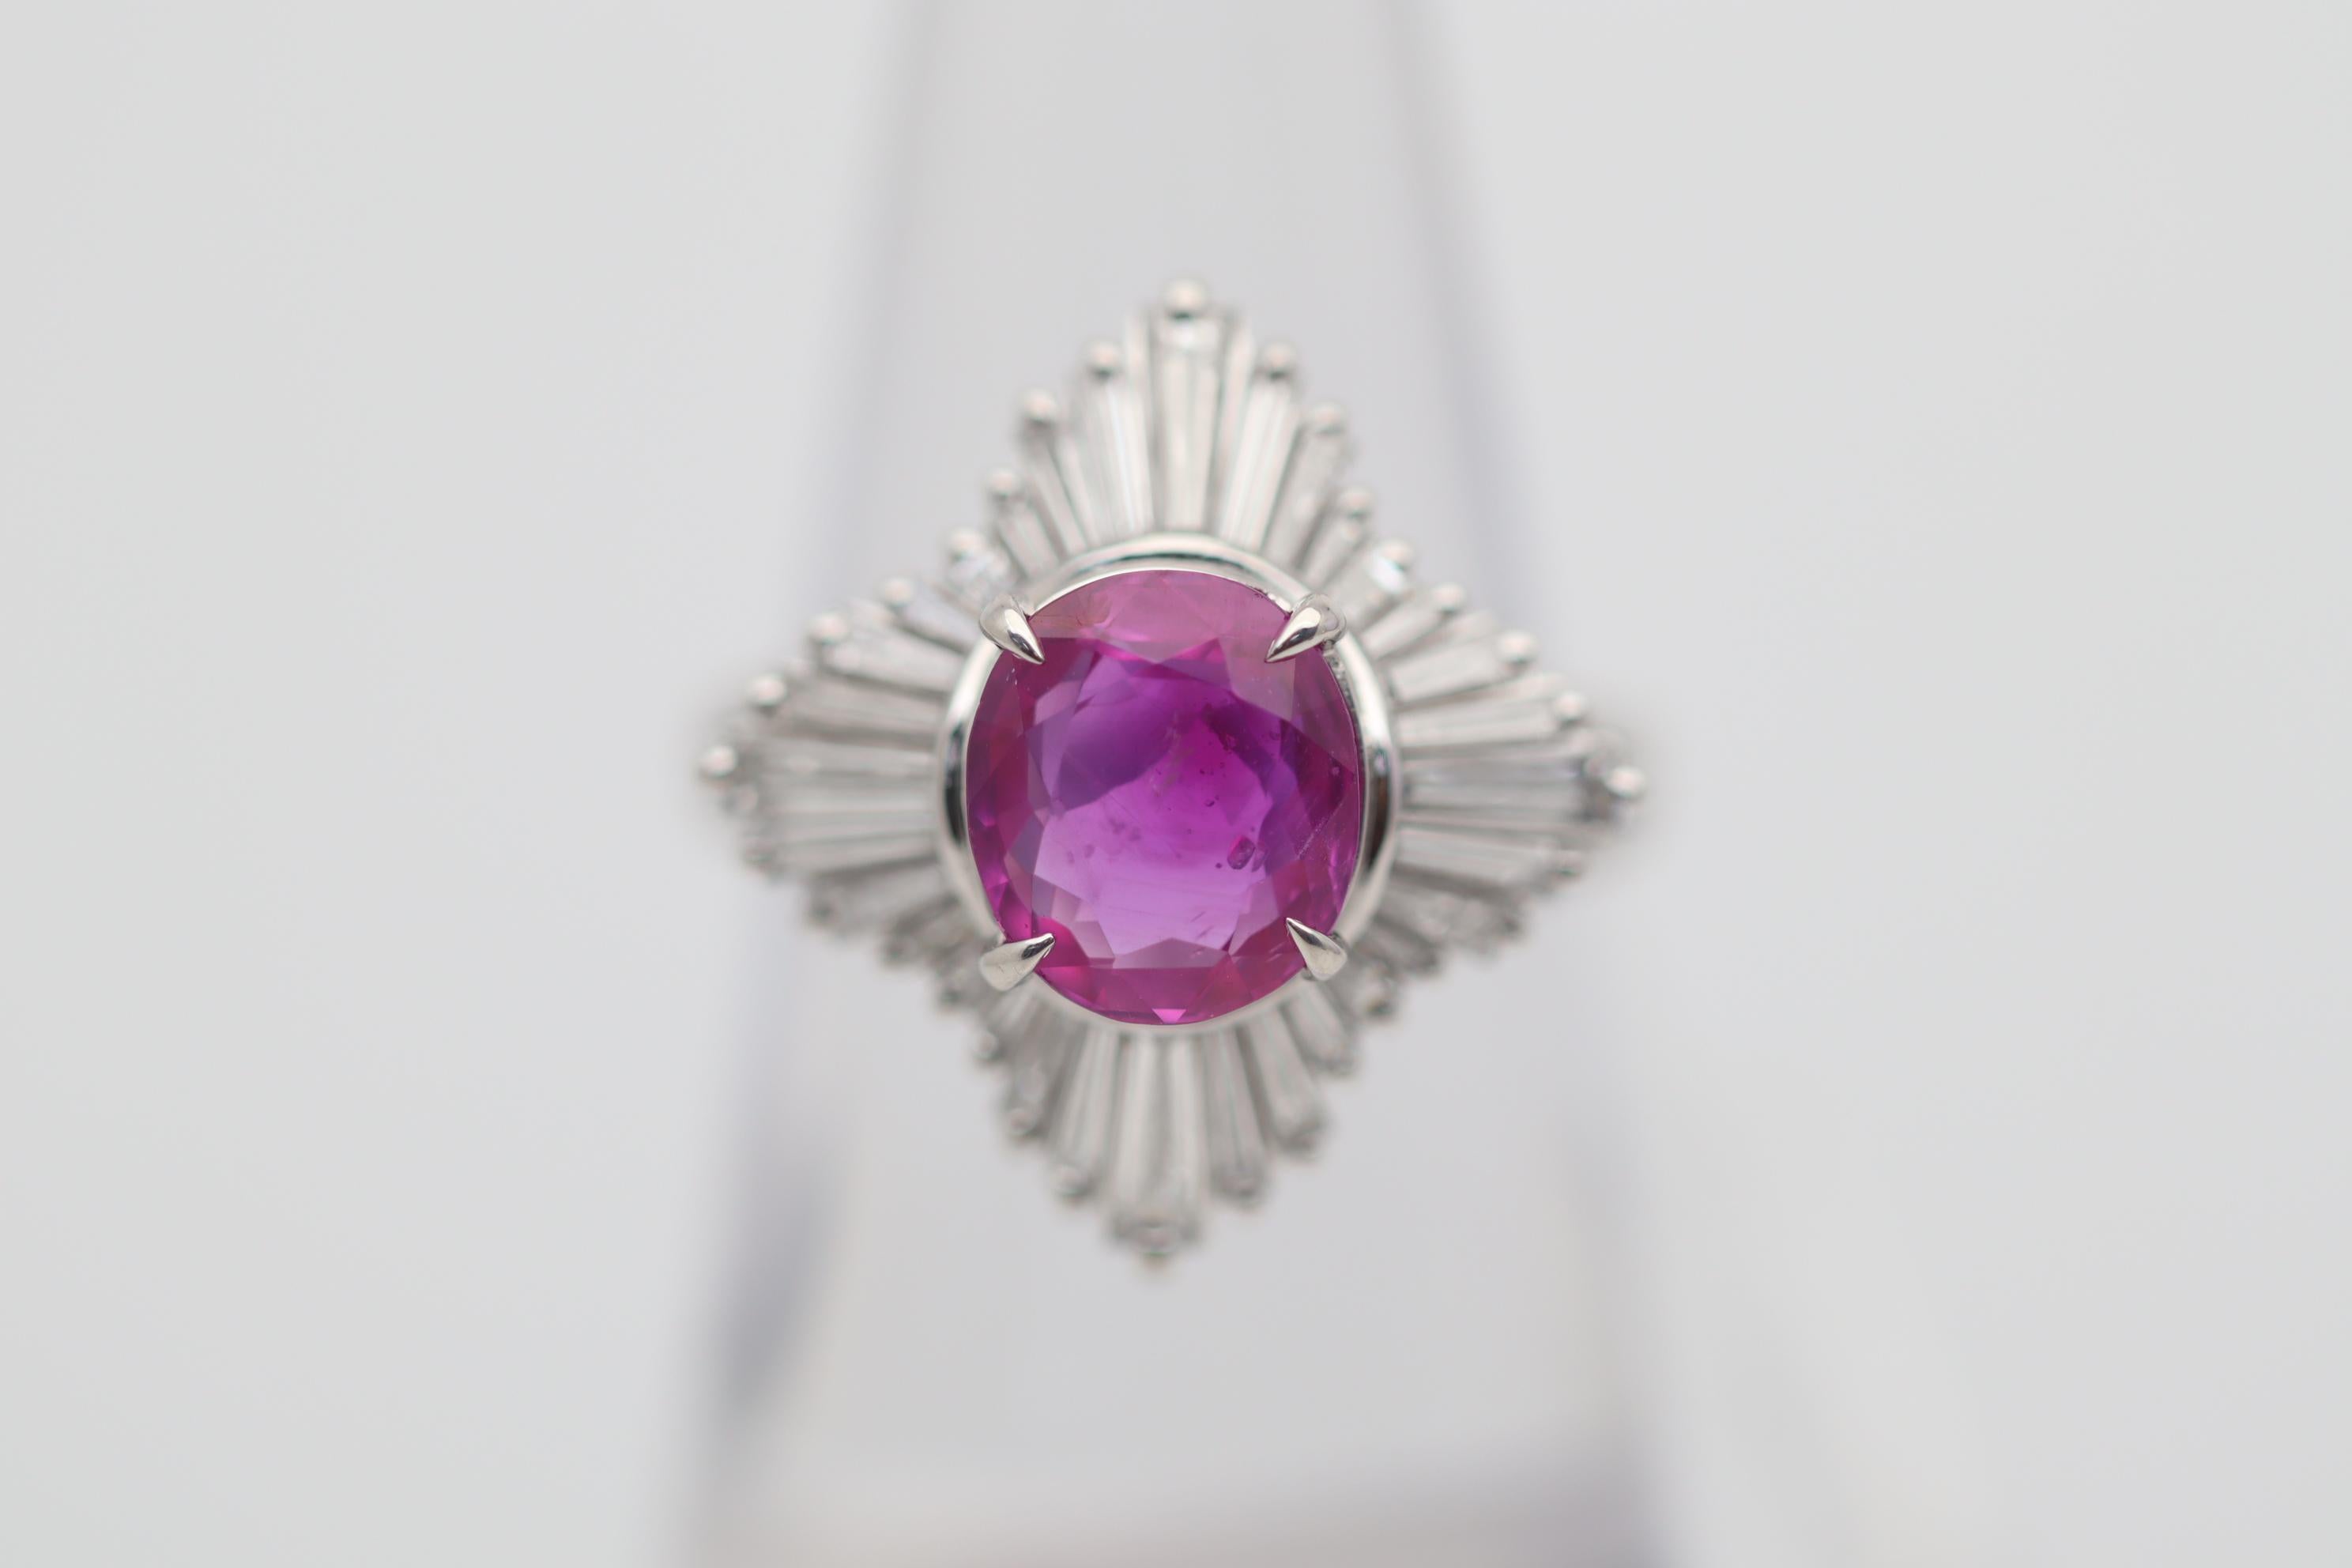 A special gem takes center stage of this diamond platinum ring. It is a 2.84 carat pink sapphire with a rich intense color, which almost makes the stone a ruby. What makes this gem even more special, other than its rich color, is that it is